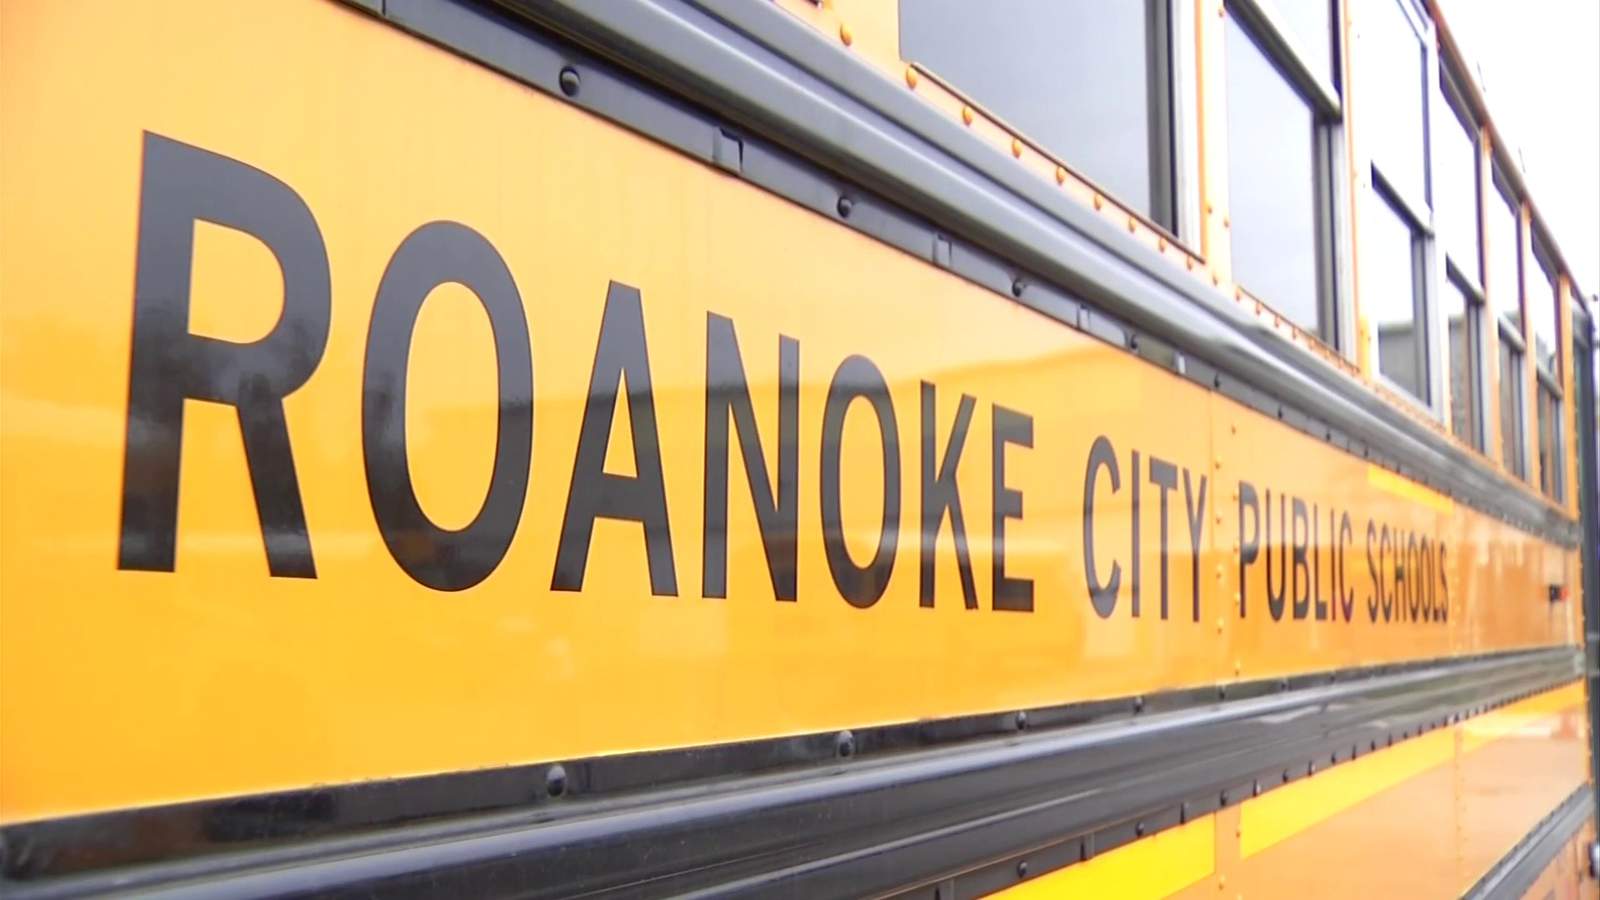 Roanoke schools answer some common questions ahead of coming school year